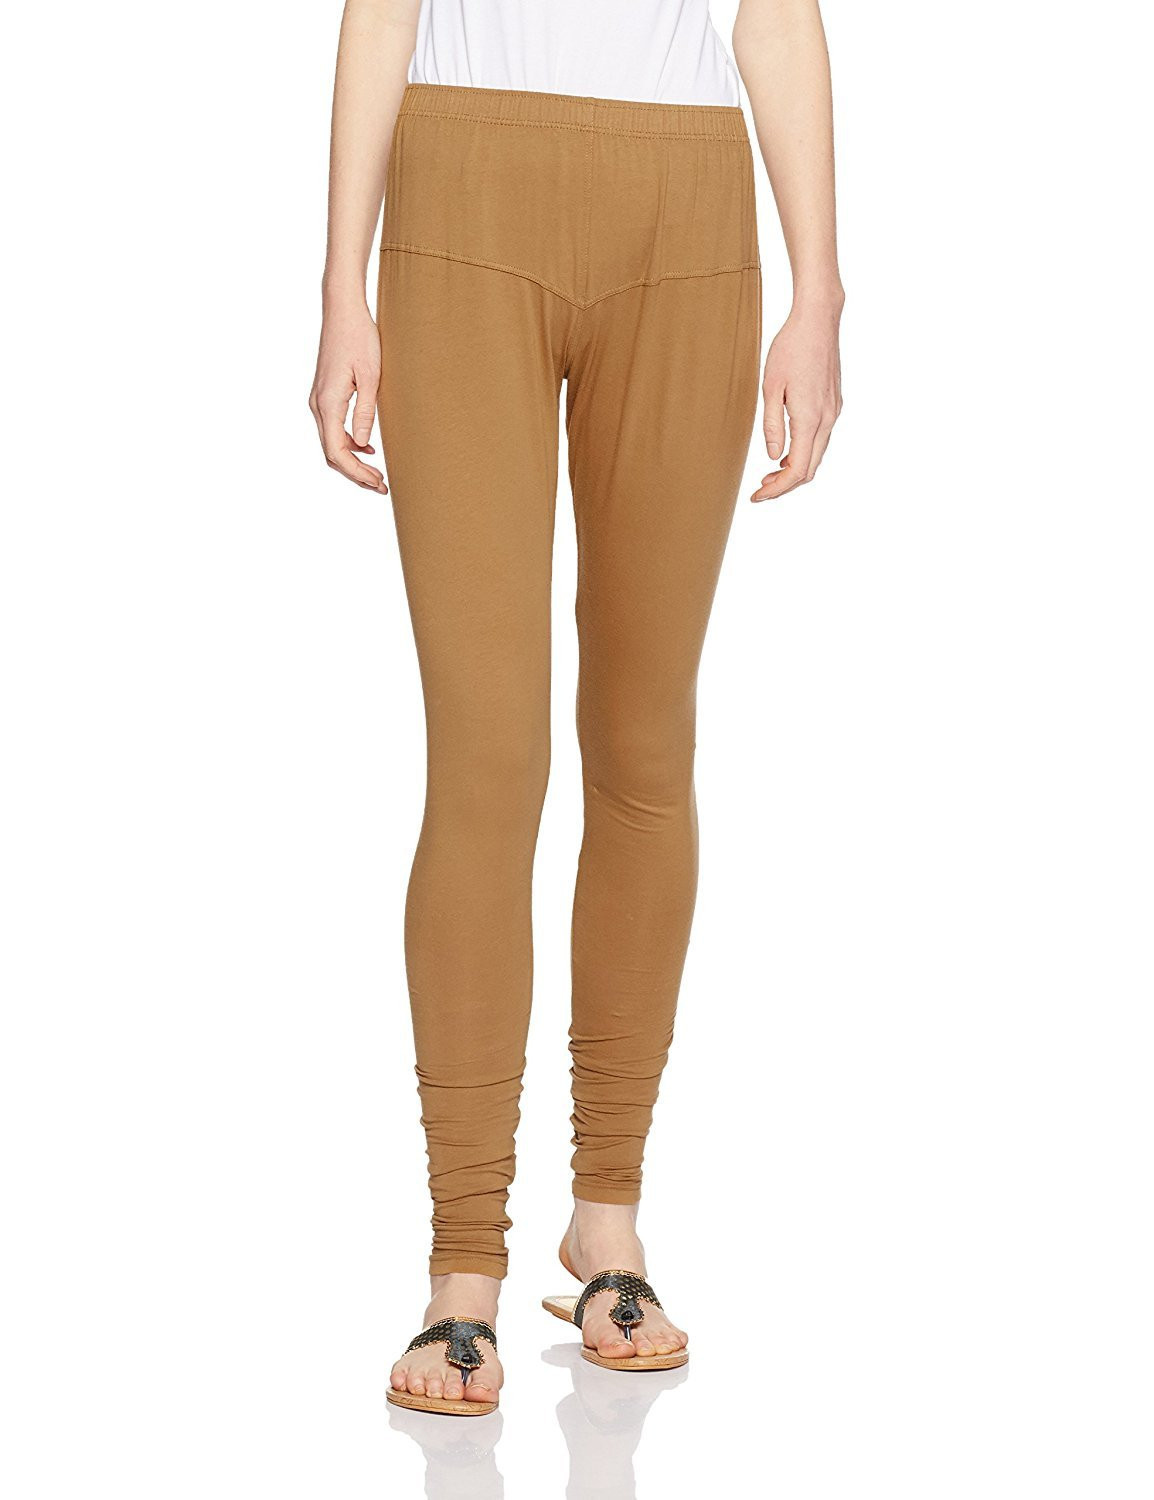 Lyra Women Regular Fit Pants - Get Best Price from Manufacturers &  Suppliers in India